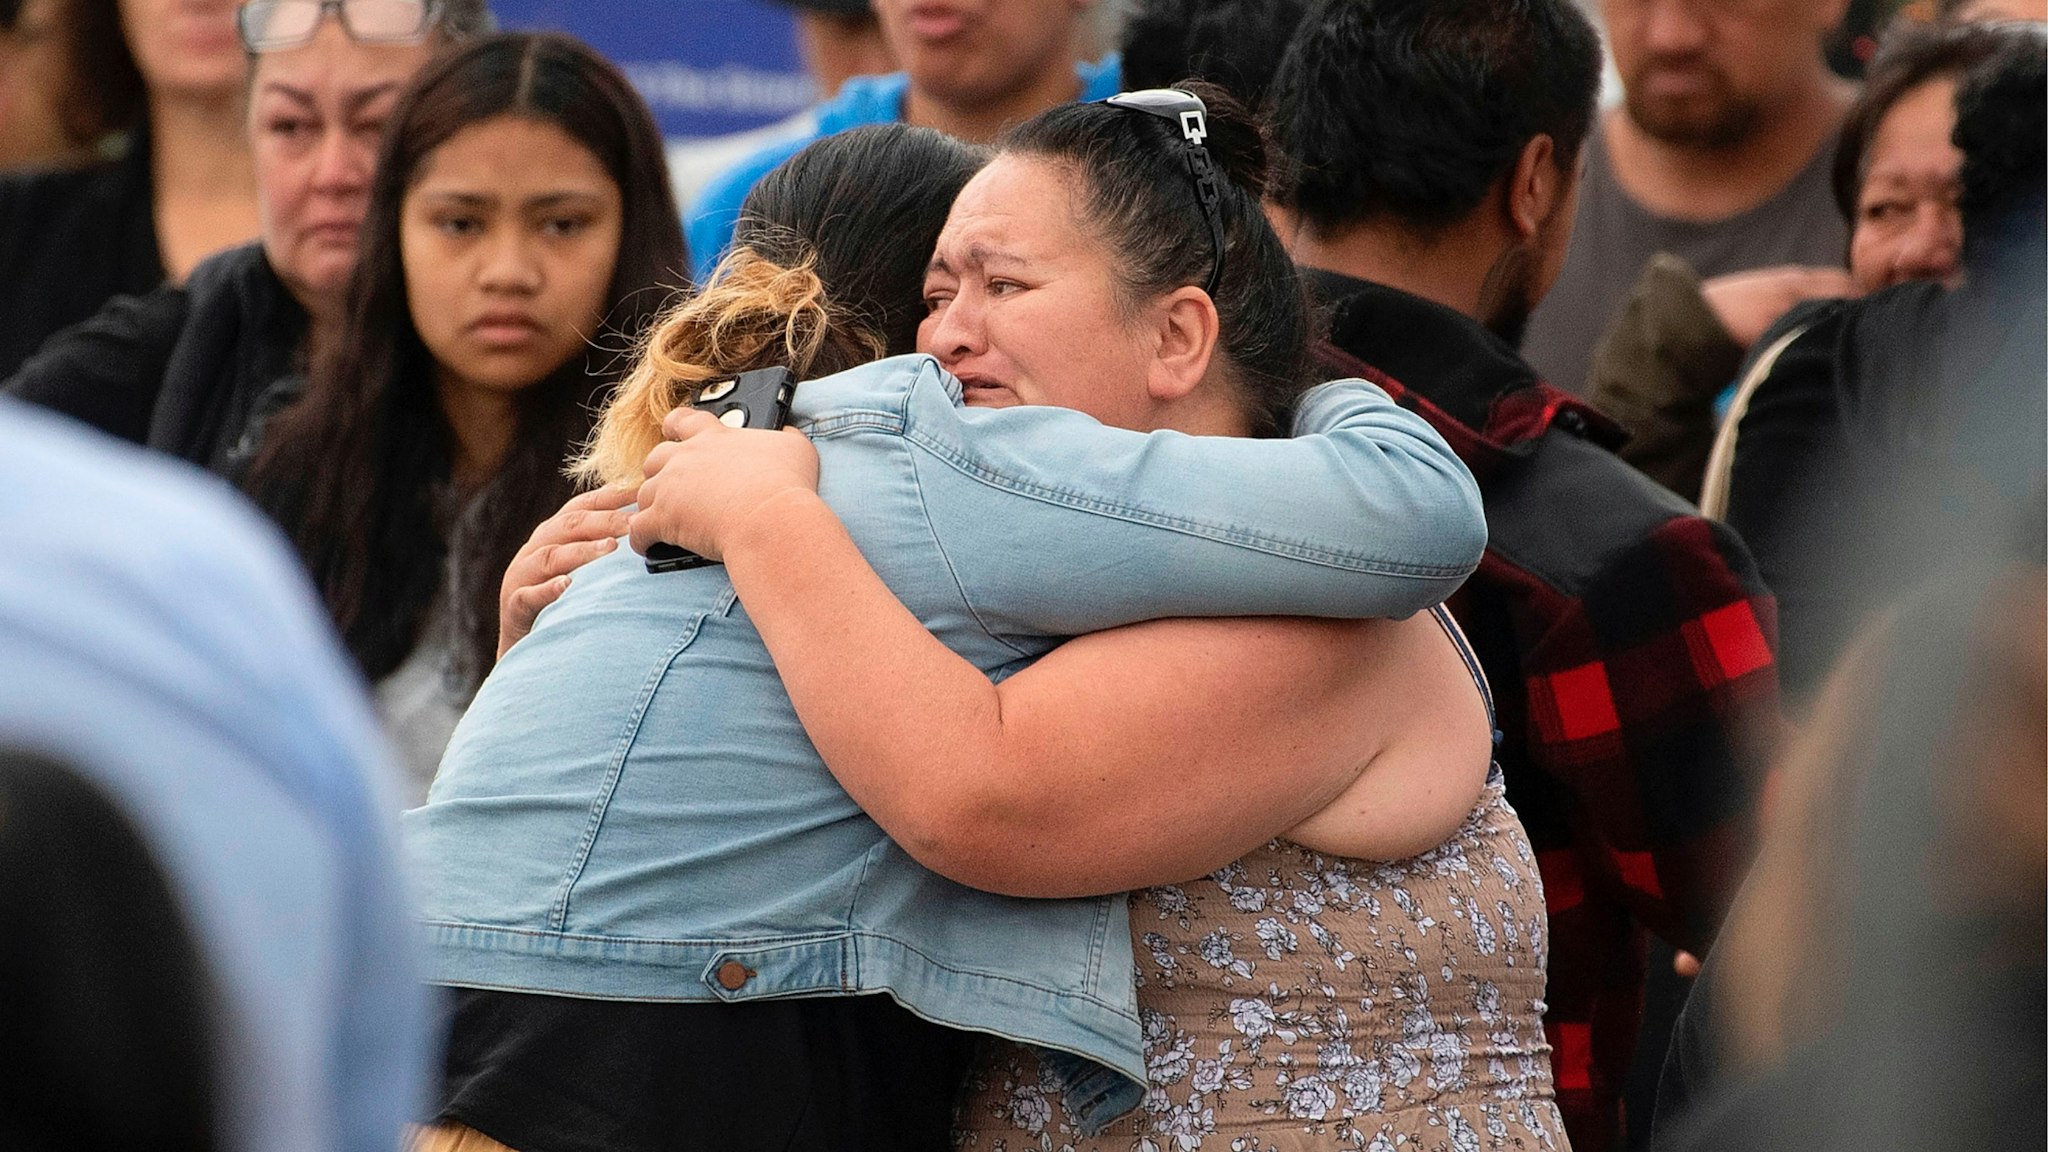 Friends and family of those lost on White Island when it erupted on December 9, arrive back into Whakatane after traveling on a White Island Tours boat for a blessing out at sea in Whakatane, New Zealand on December 13, 2019.